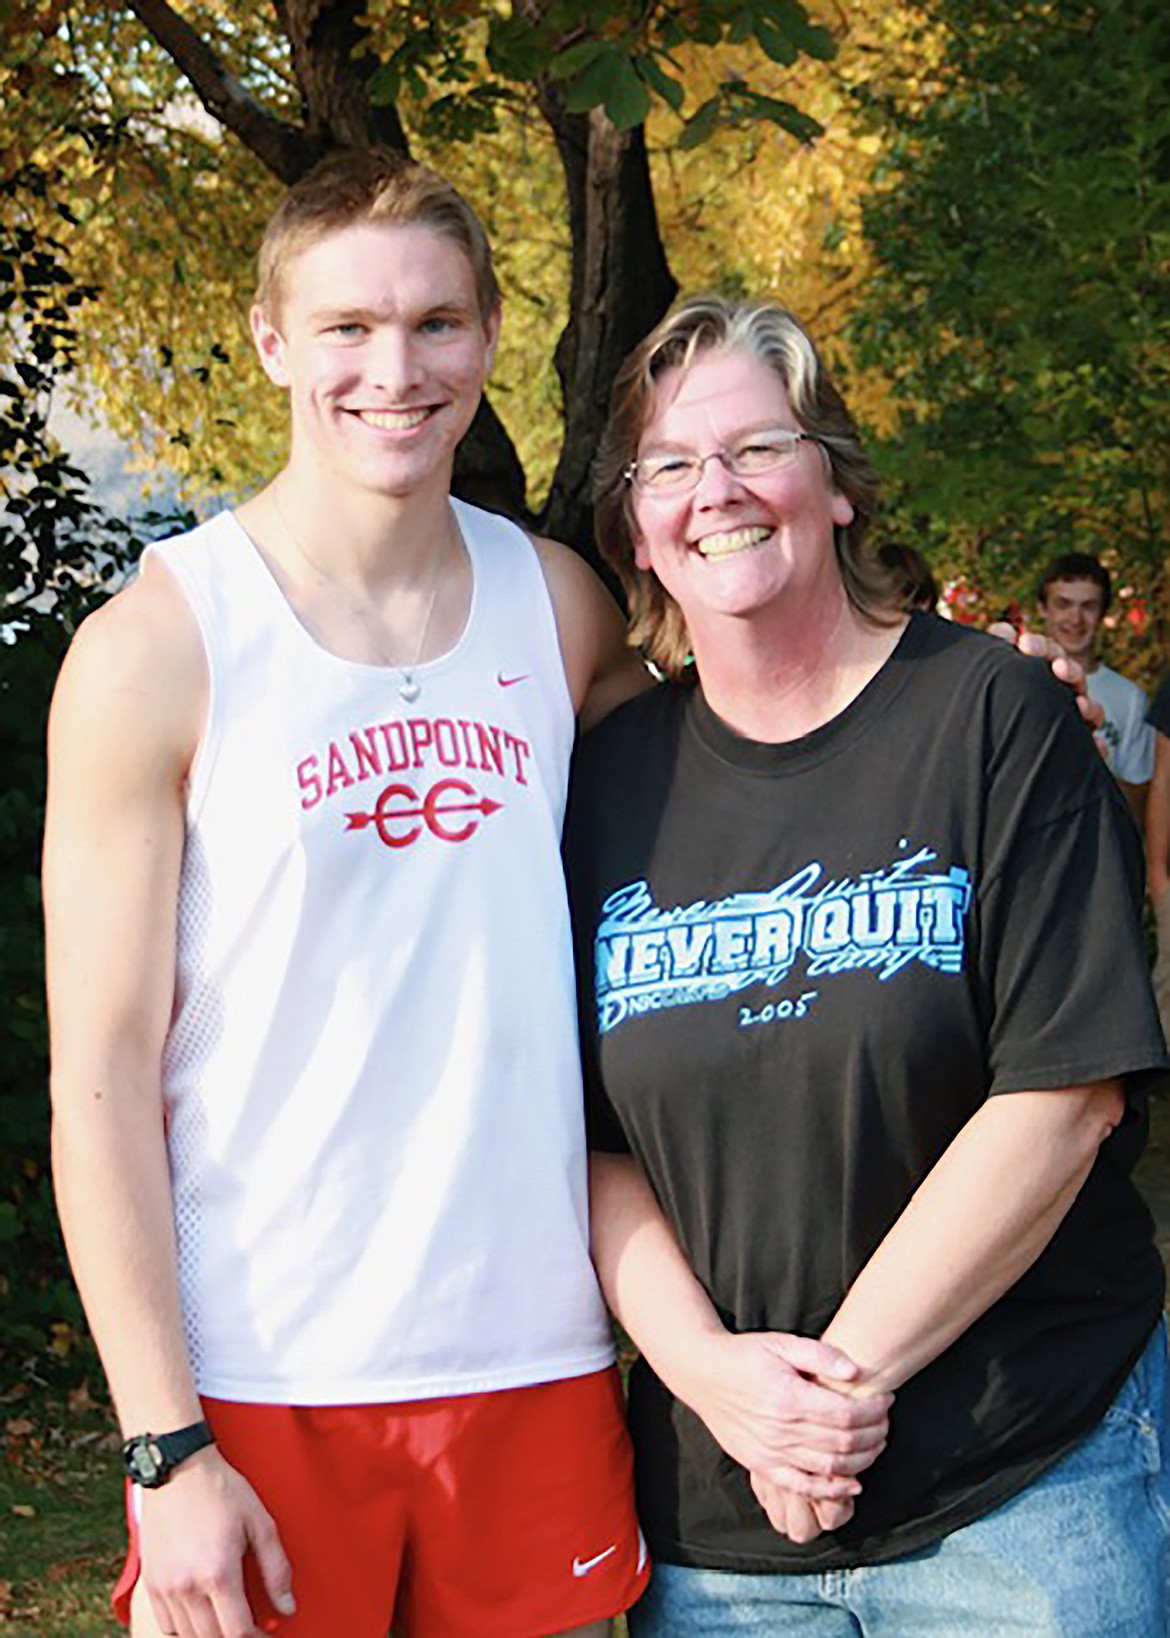 Tim Prummer is pictured with his mom, Kathy, as a Sandpoint High School student. After he died as a result of an accidental overdose, his parent Kathy Prummer and  Gregg and wife Shawna Prummer came together to fund The Tim Project at North Idaho Neurotherapy to help others who face challenges similar to Tim's.